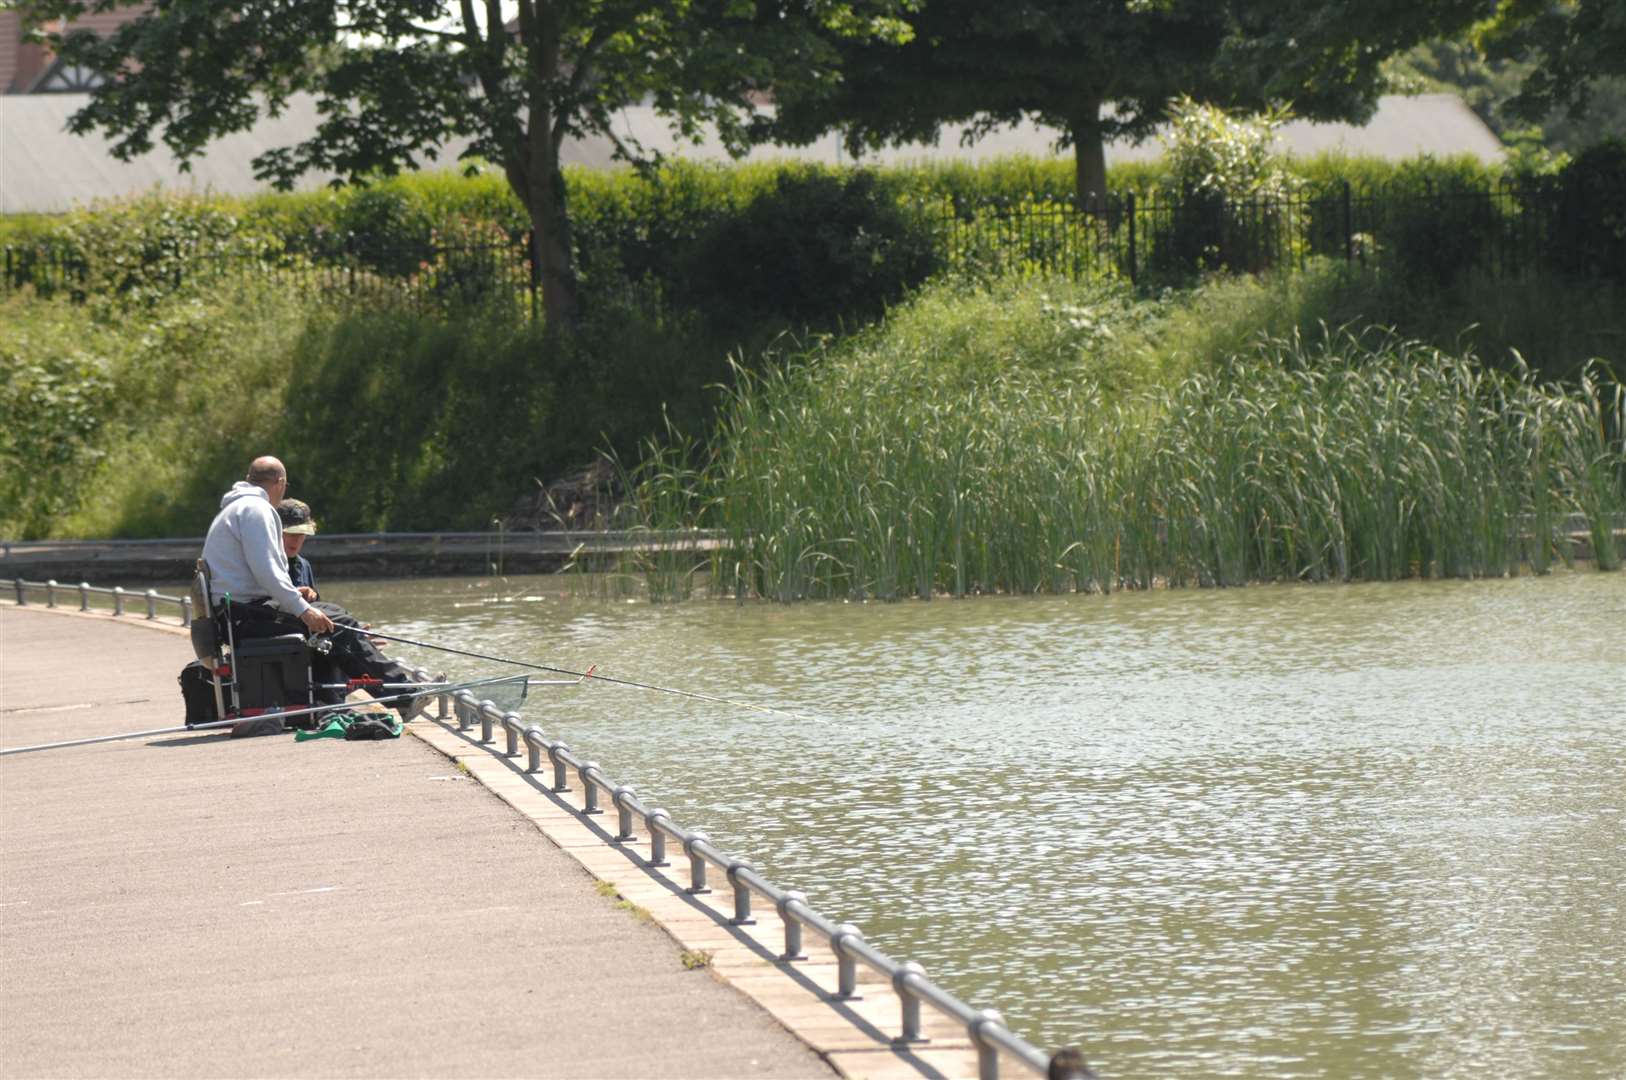 Radnor Park is popular with anglers